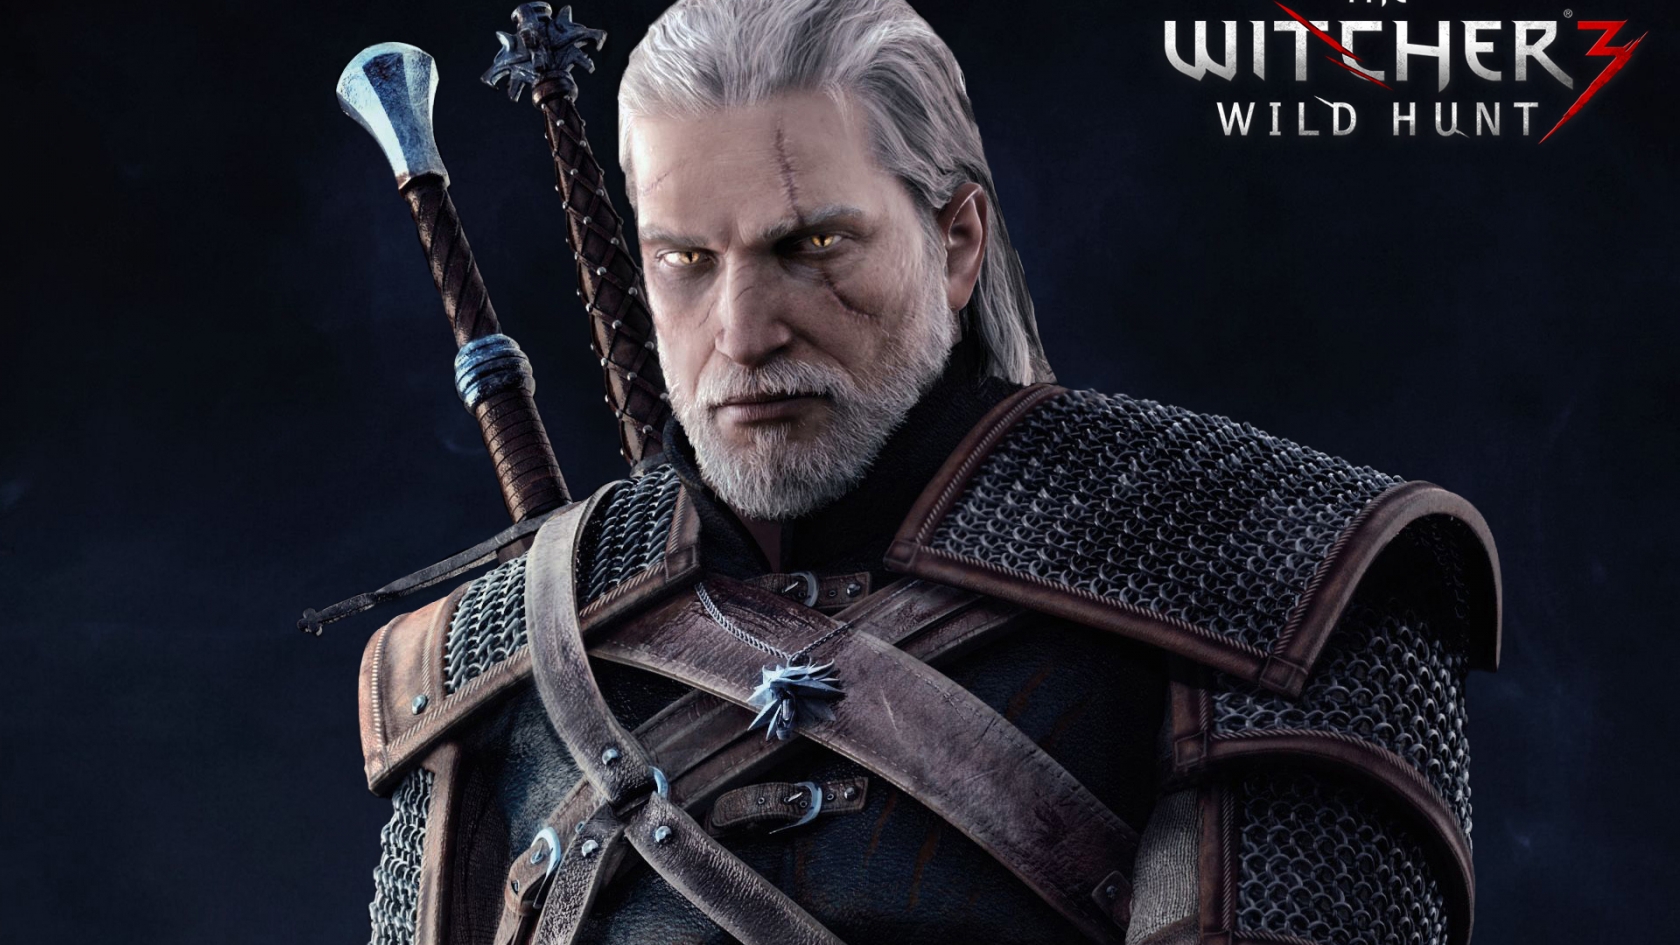 The Witcher 3 Wild Hunt Game for 1680 x 945 HDTV resolution